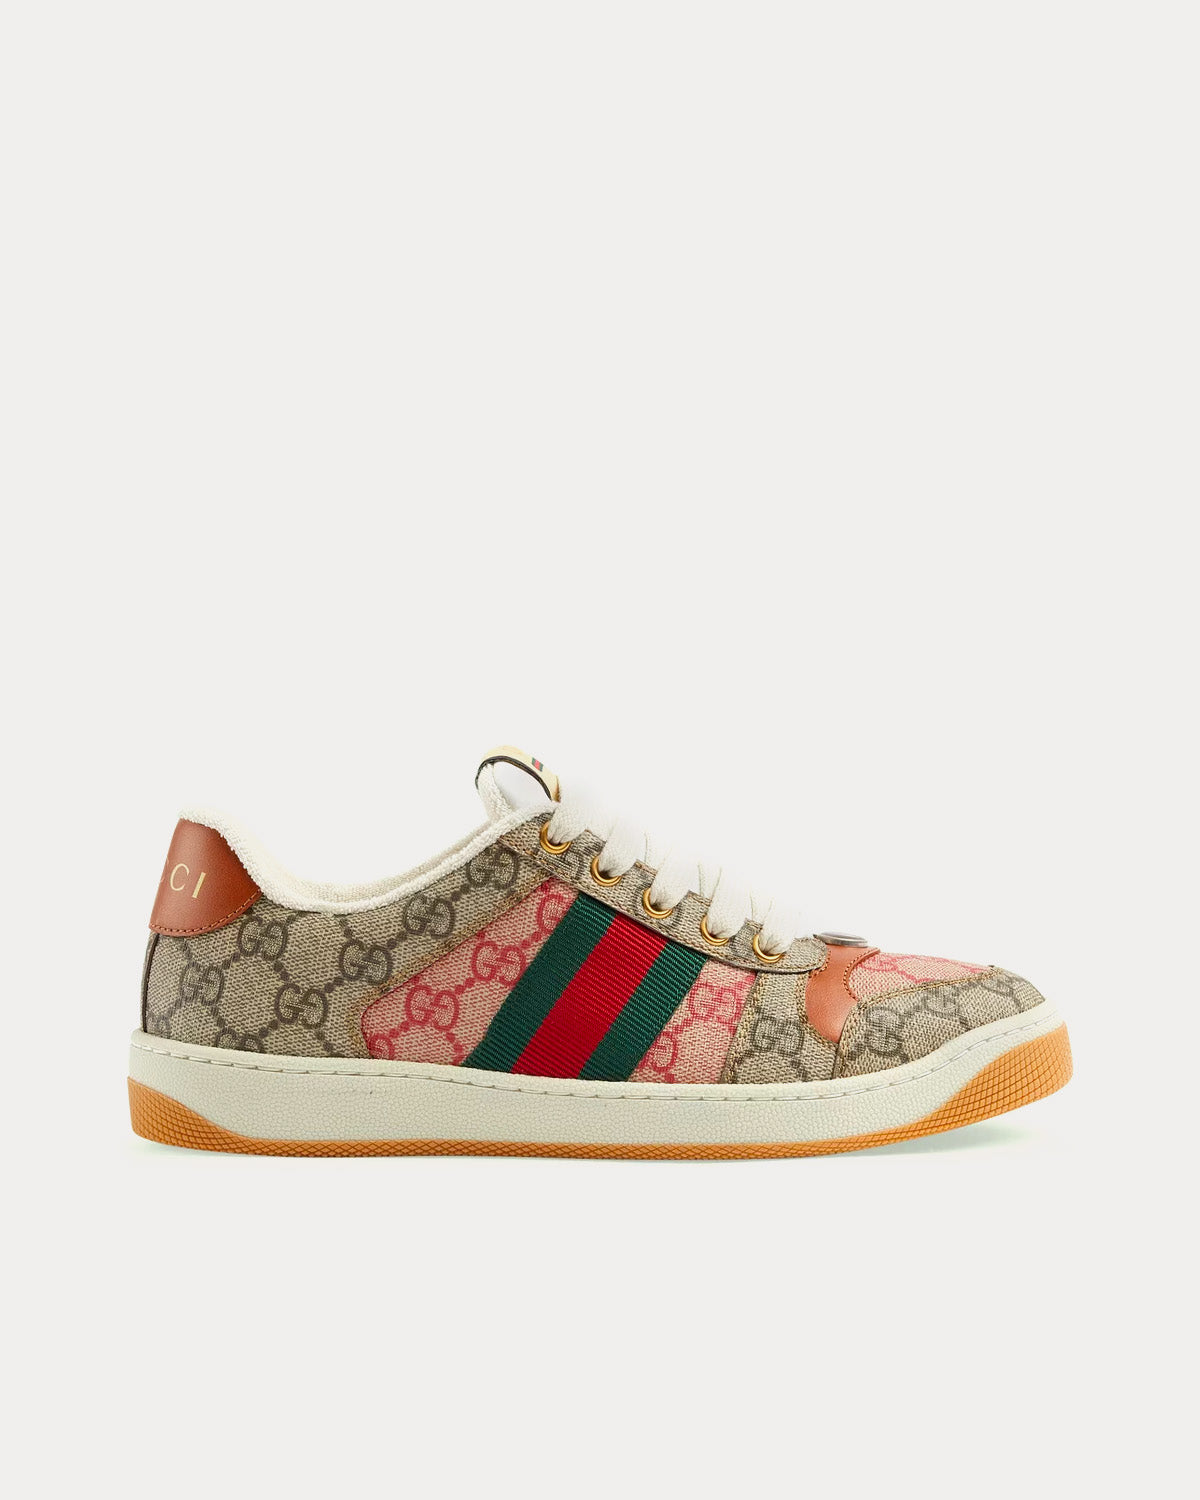 Gucci - Screener GG Supreme Canvas & Leather Beige Low Top Sneakers